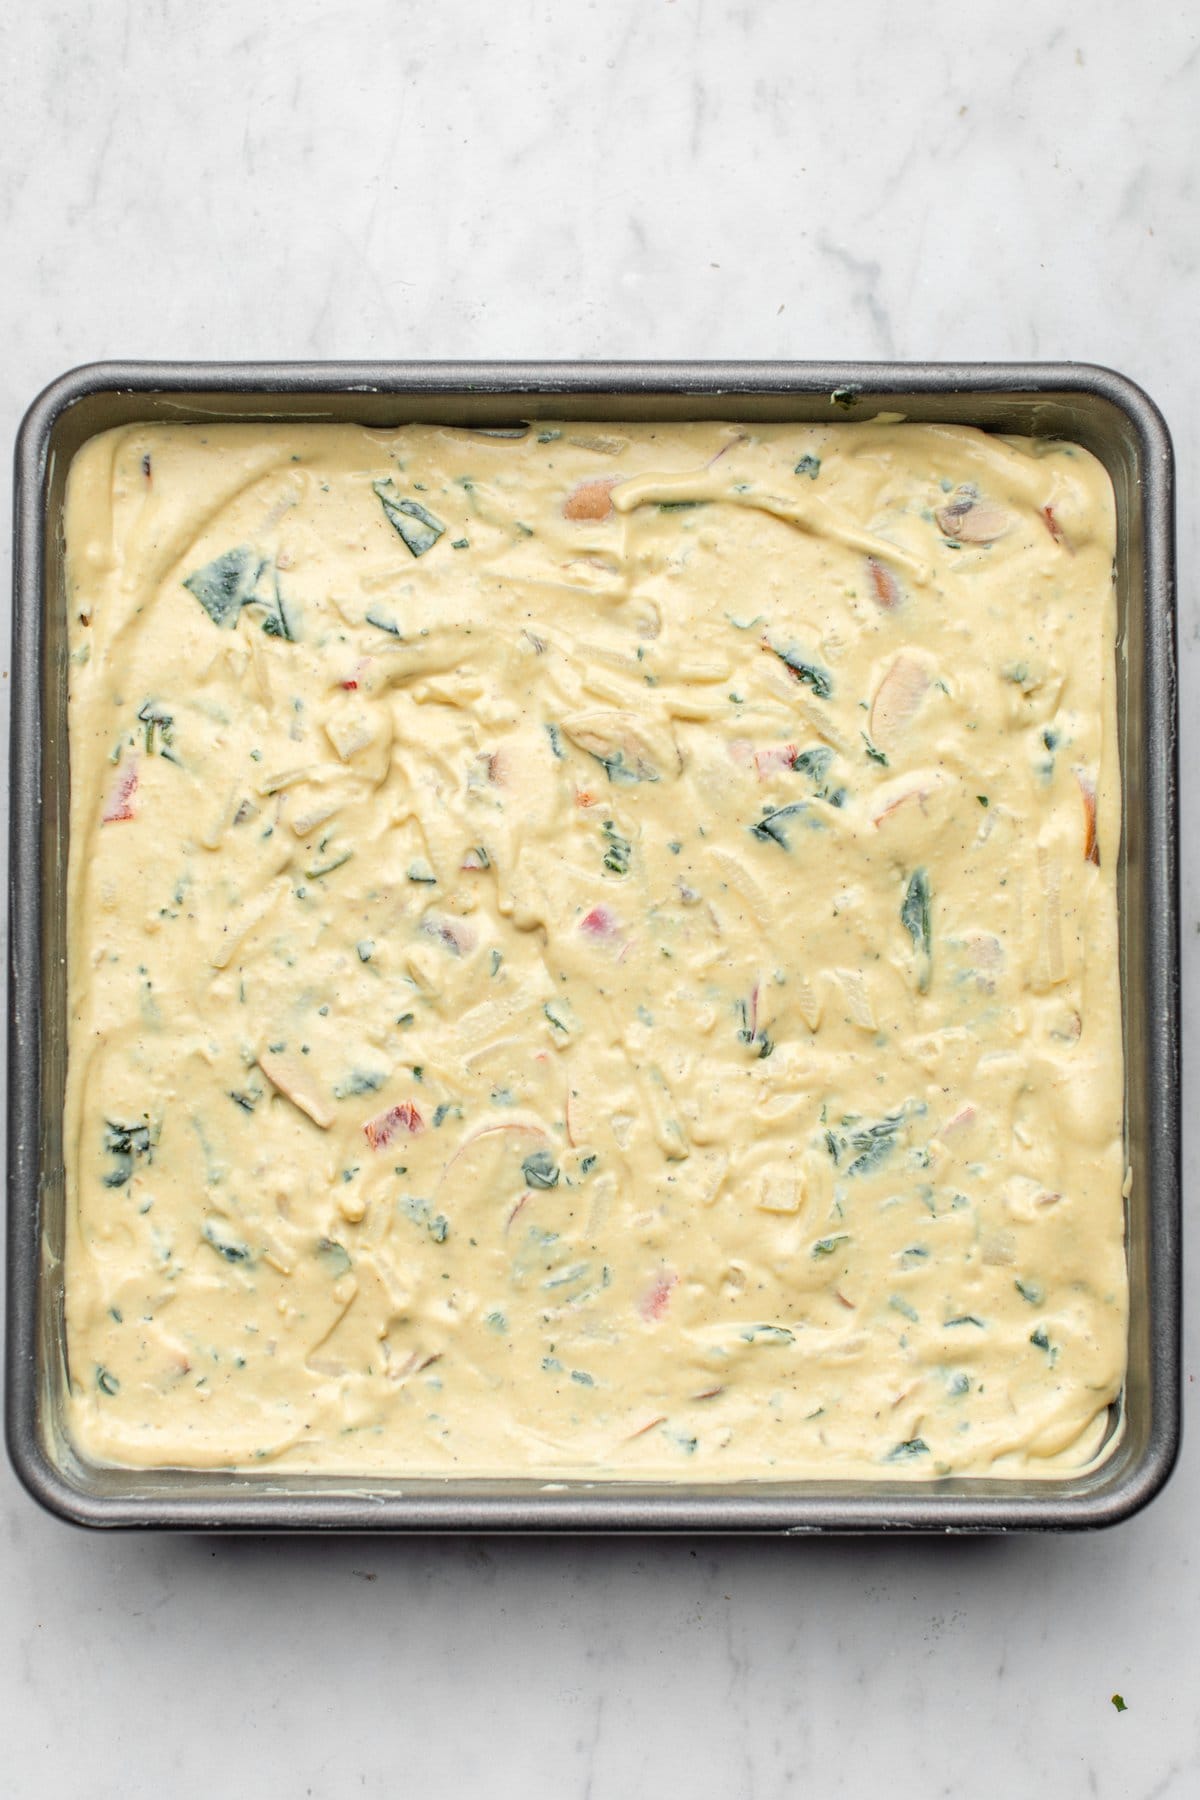 unbaked vegan egg casserole in baking tray on marble background